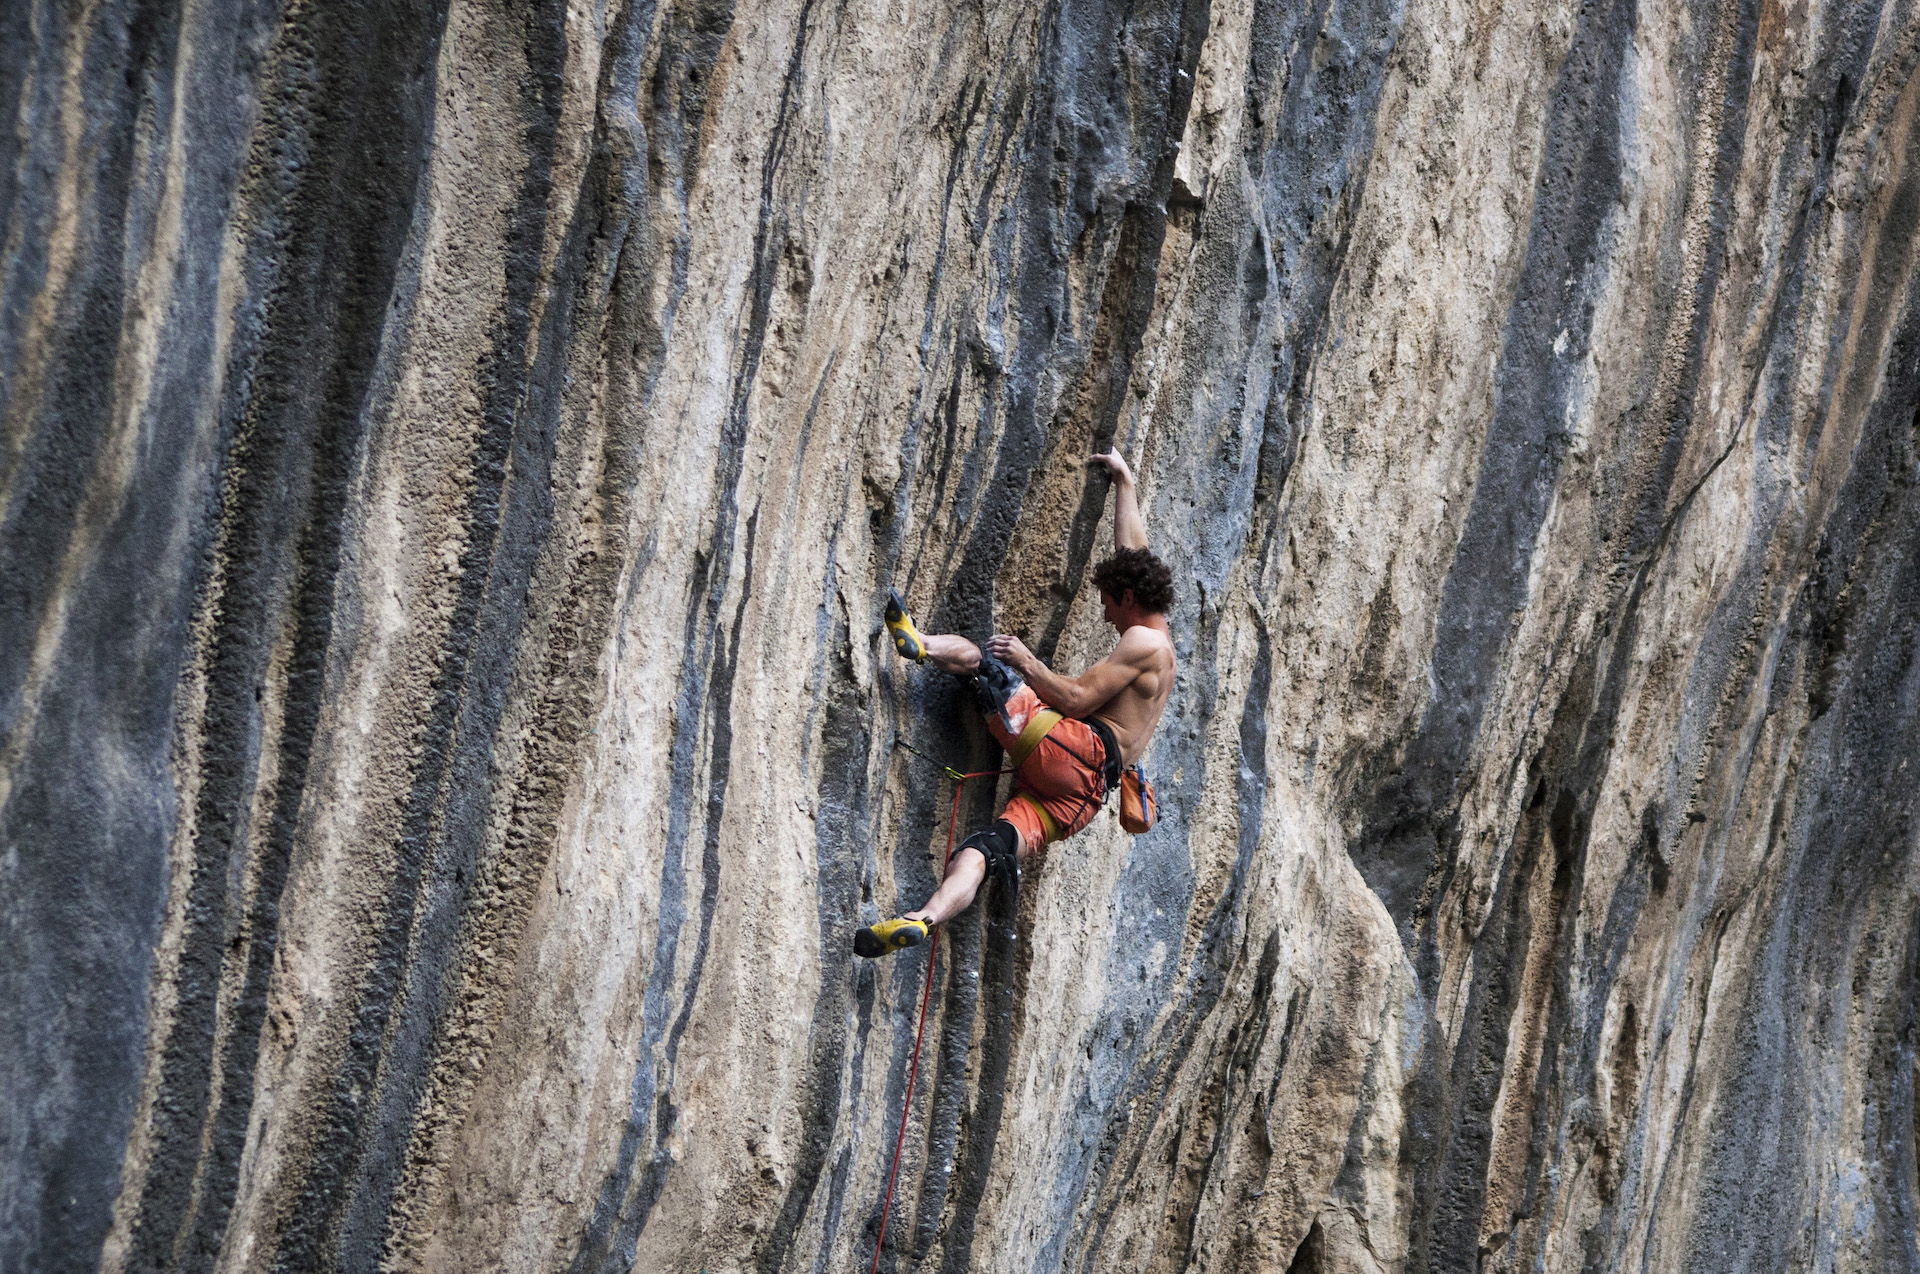 Adam Ondra, one of the top climbers in the world, on a route at Brar. Image: Elion Çikopano.